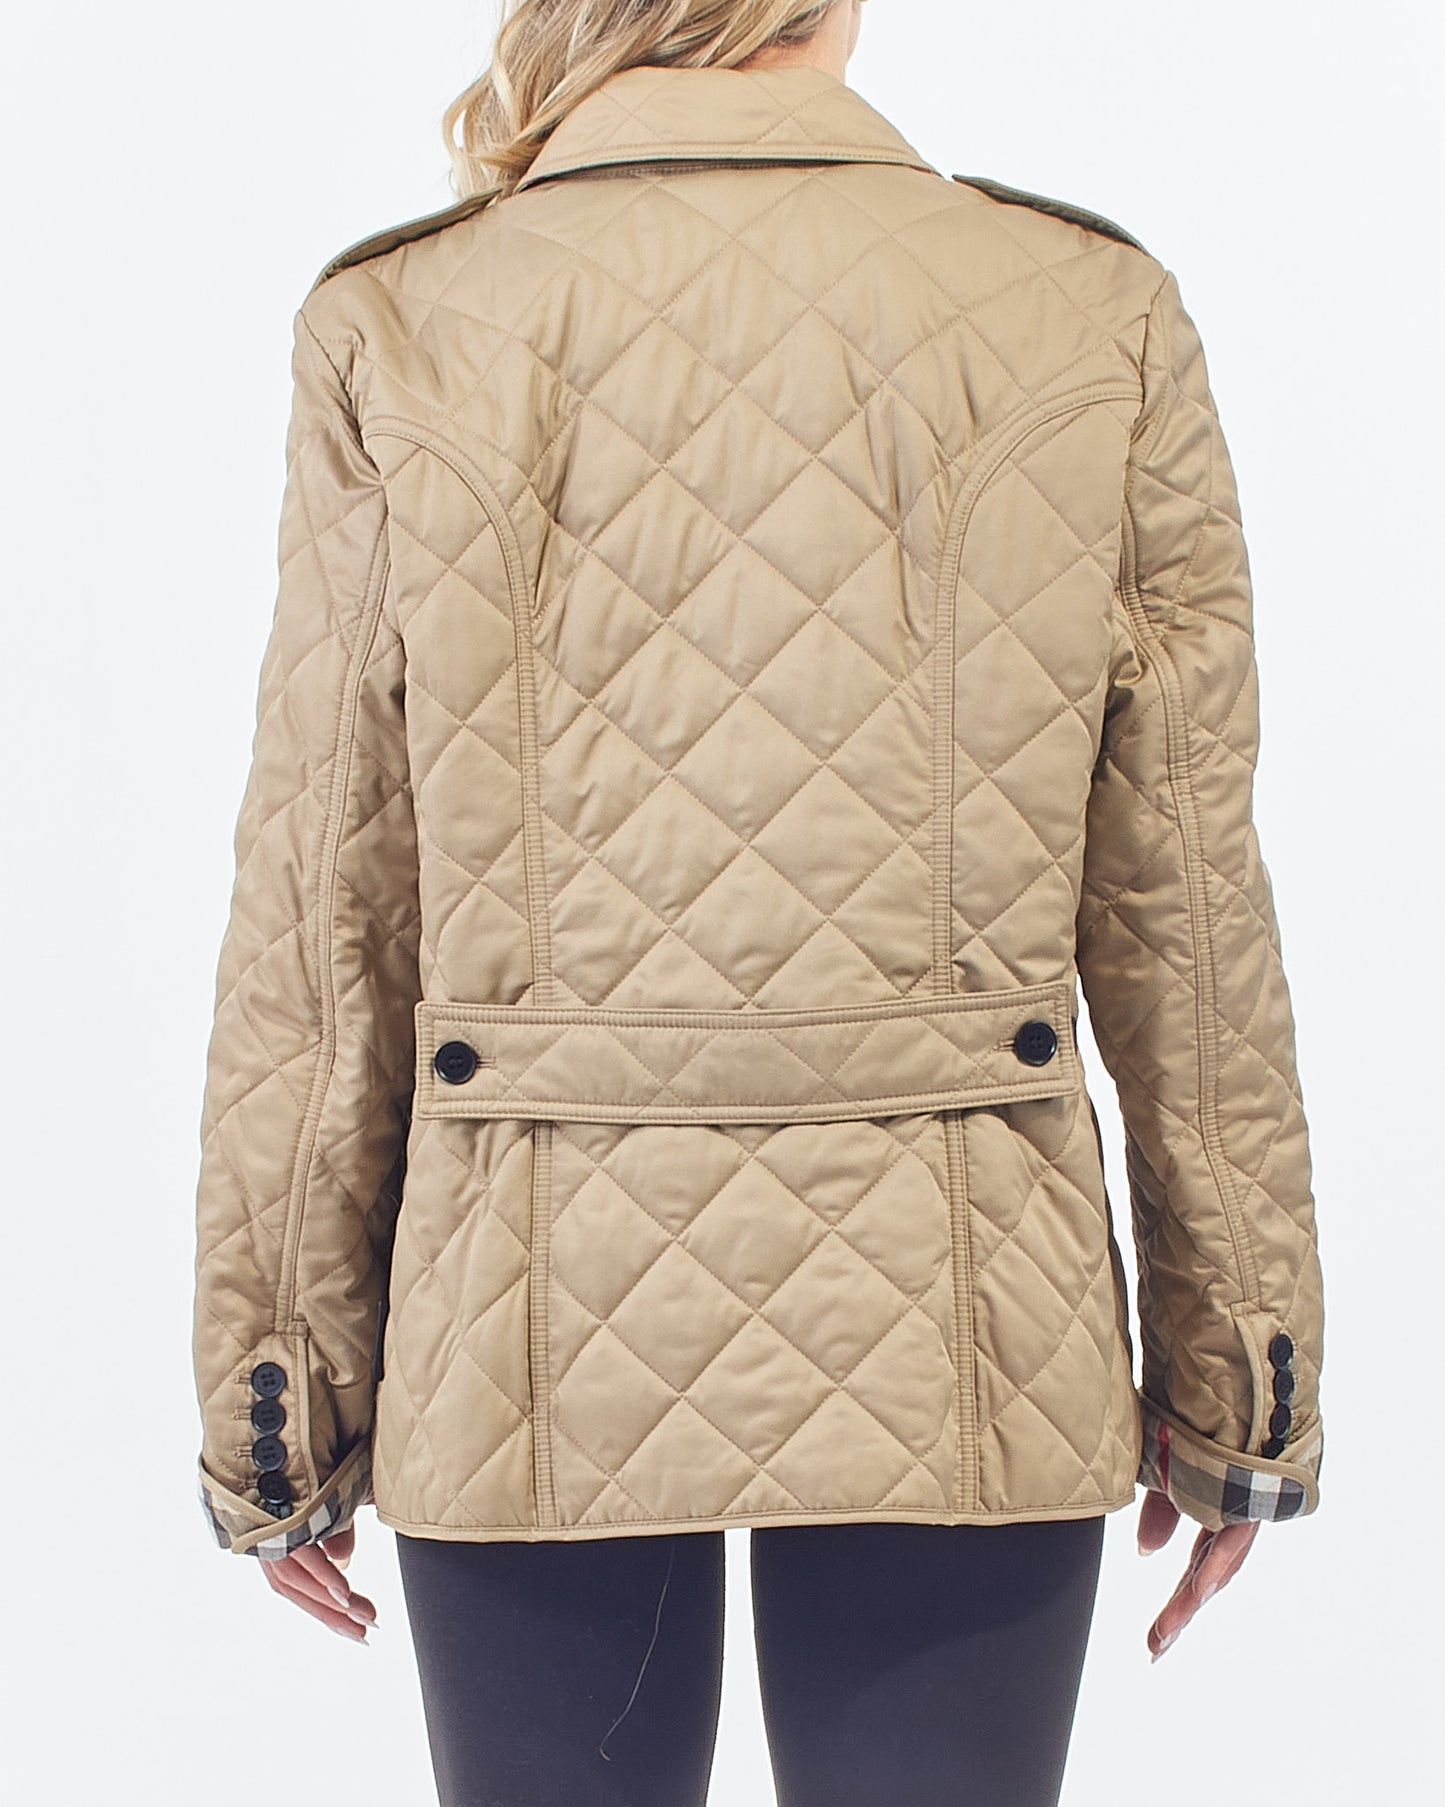 Burberry Beige Diamond Quilted Vintage Check Jacket - XL